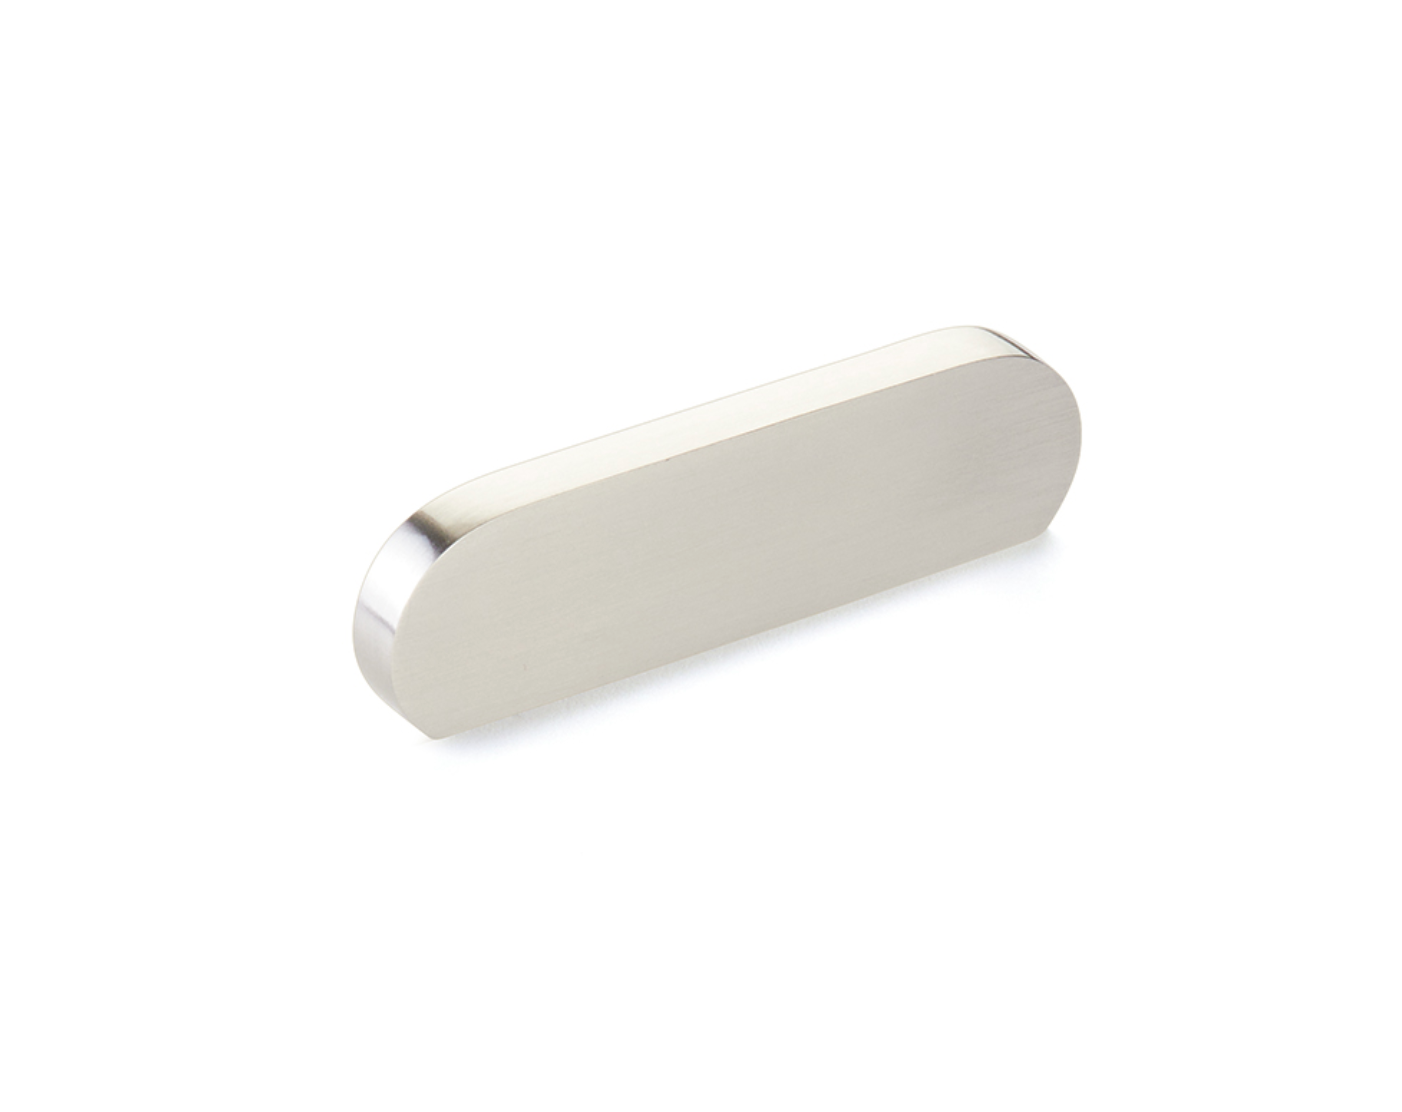 Brushed Nickel "Bit" Rounded Drawer Pulls and Cabinet Knobs - Industry Hardware